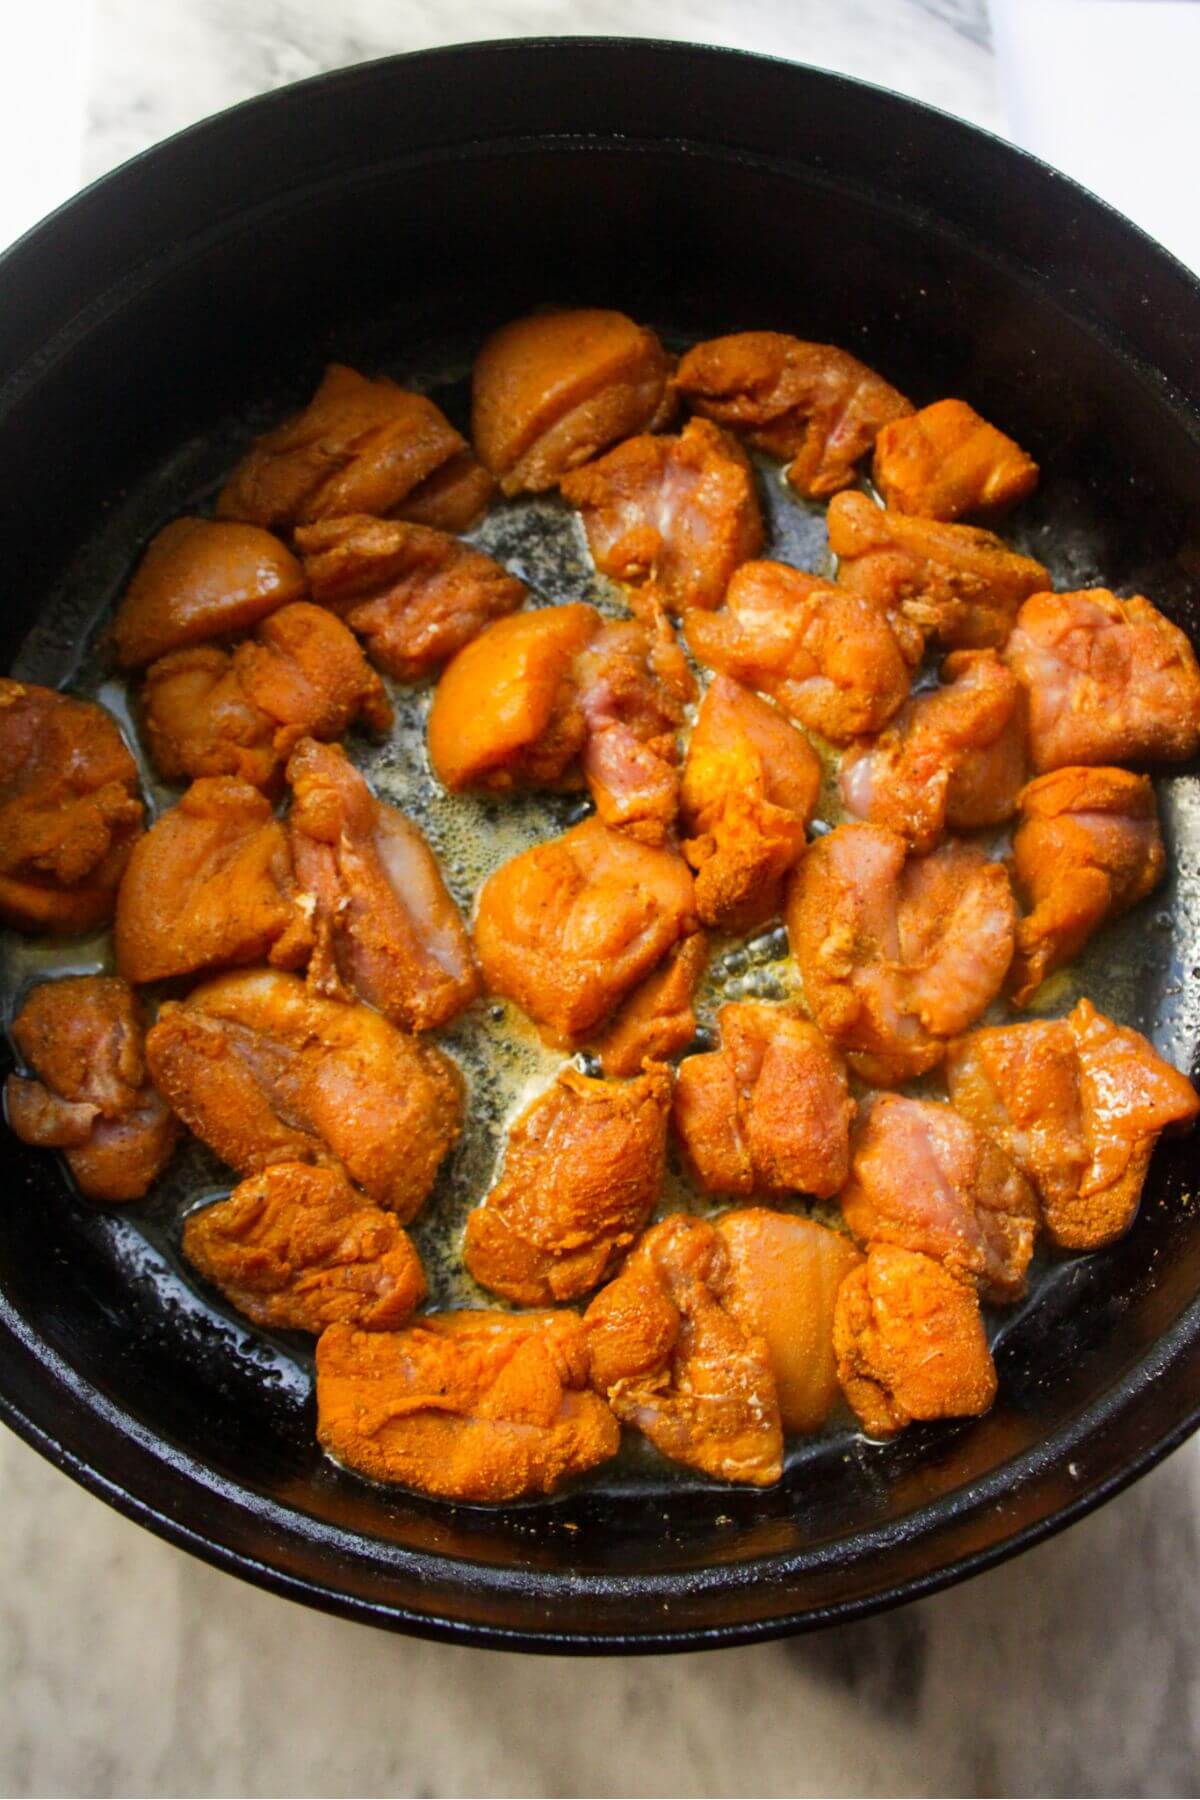 Chopped chicken thighs cooking in a large black pan.